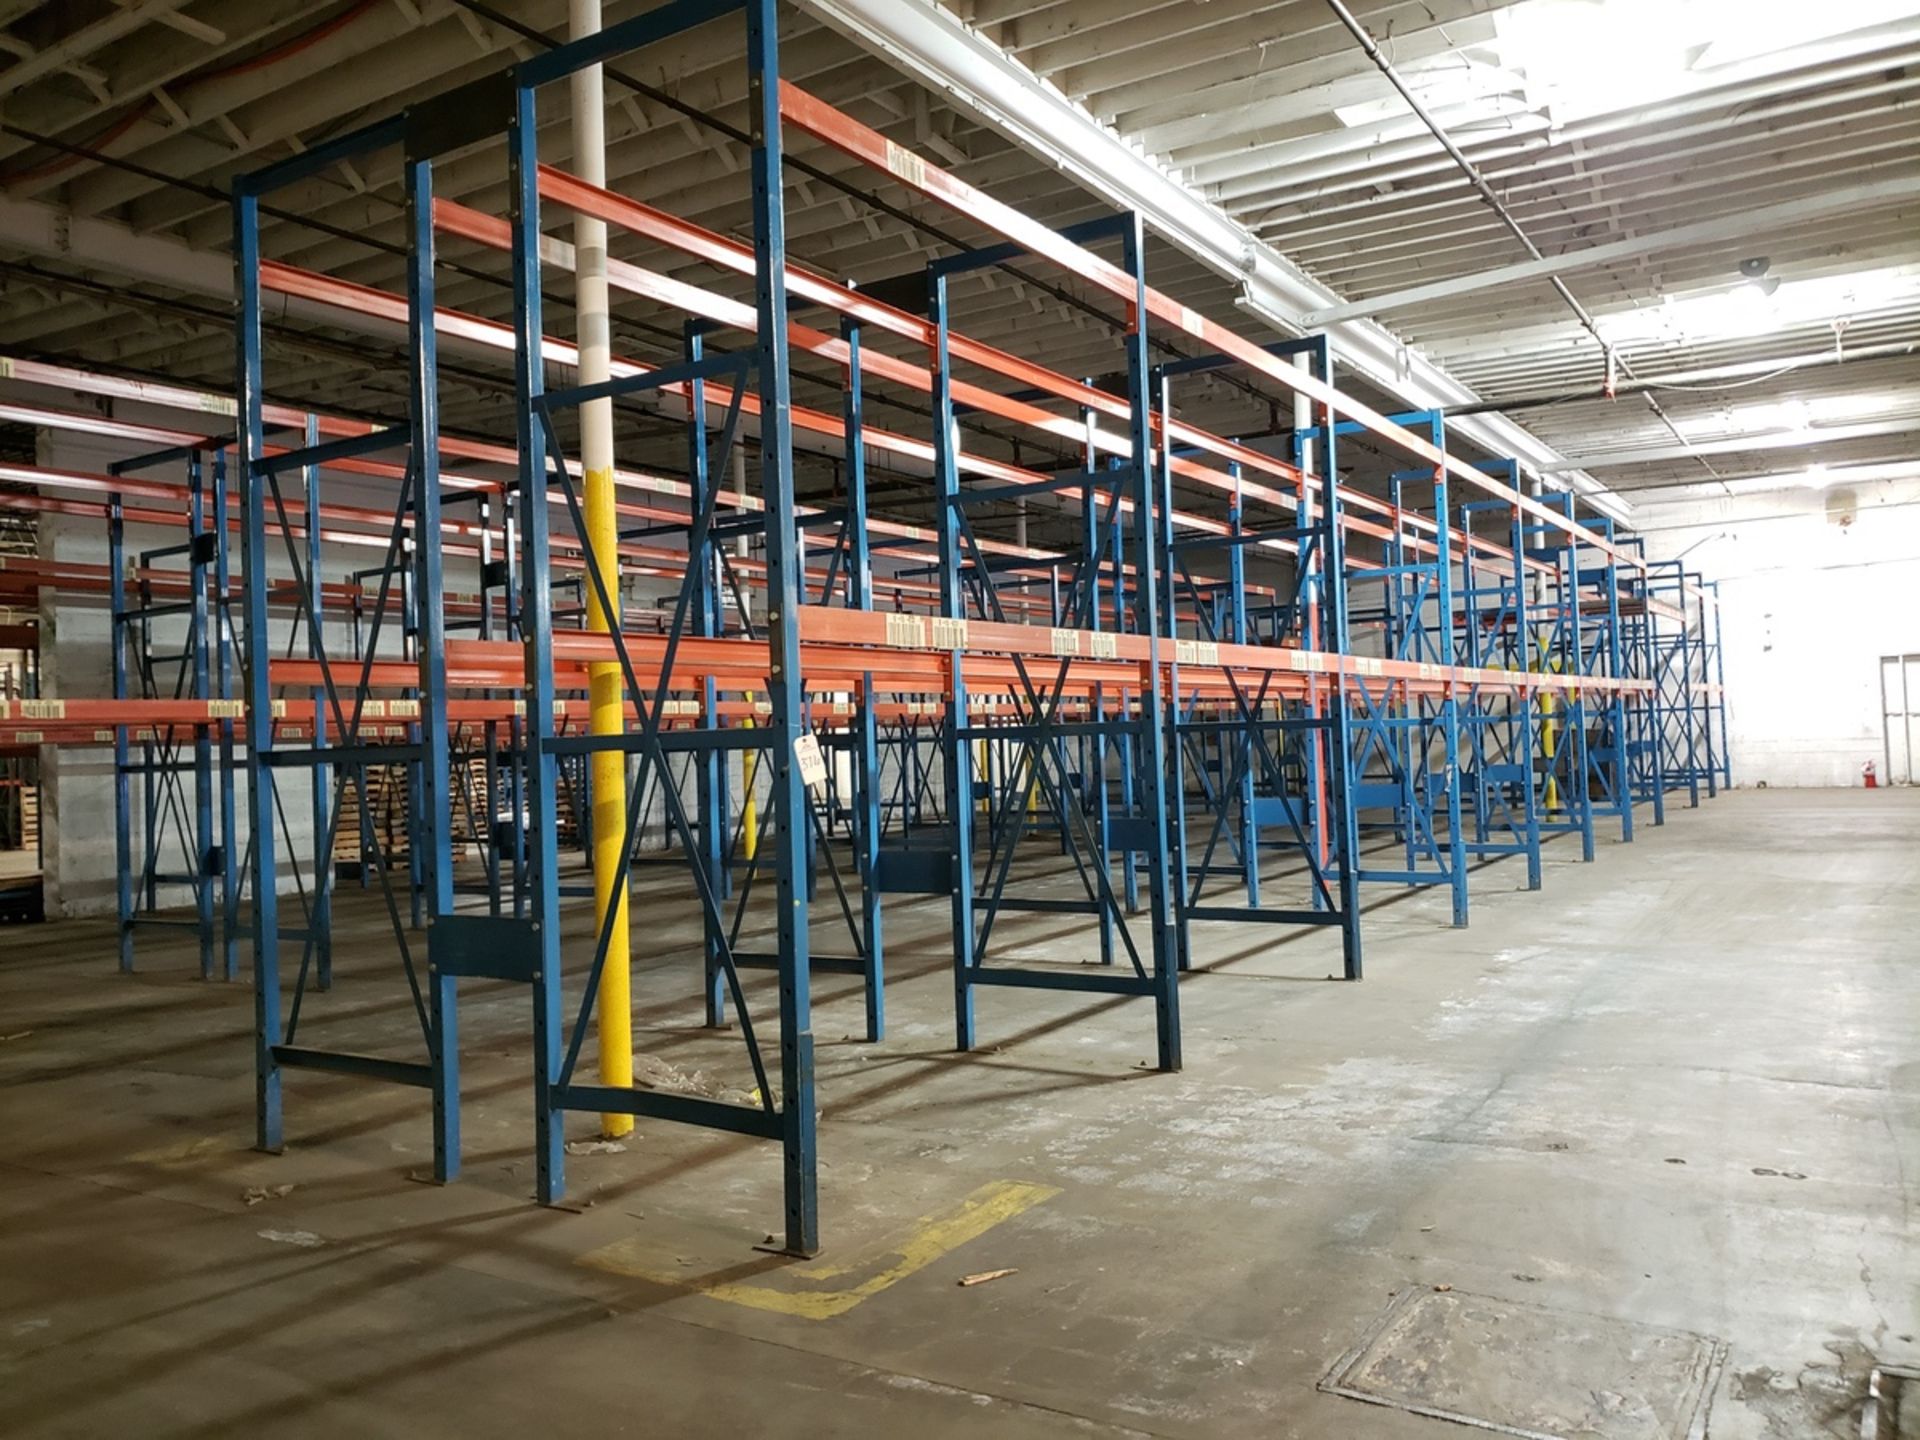 Lot of Pallet Racking, (22) 42" x 12' Uprights, (76) 8' Beams | Rig Fee: $2500